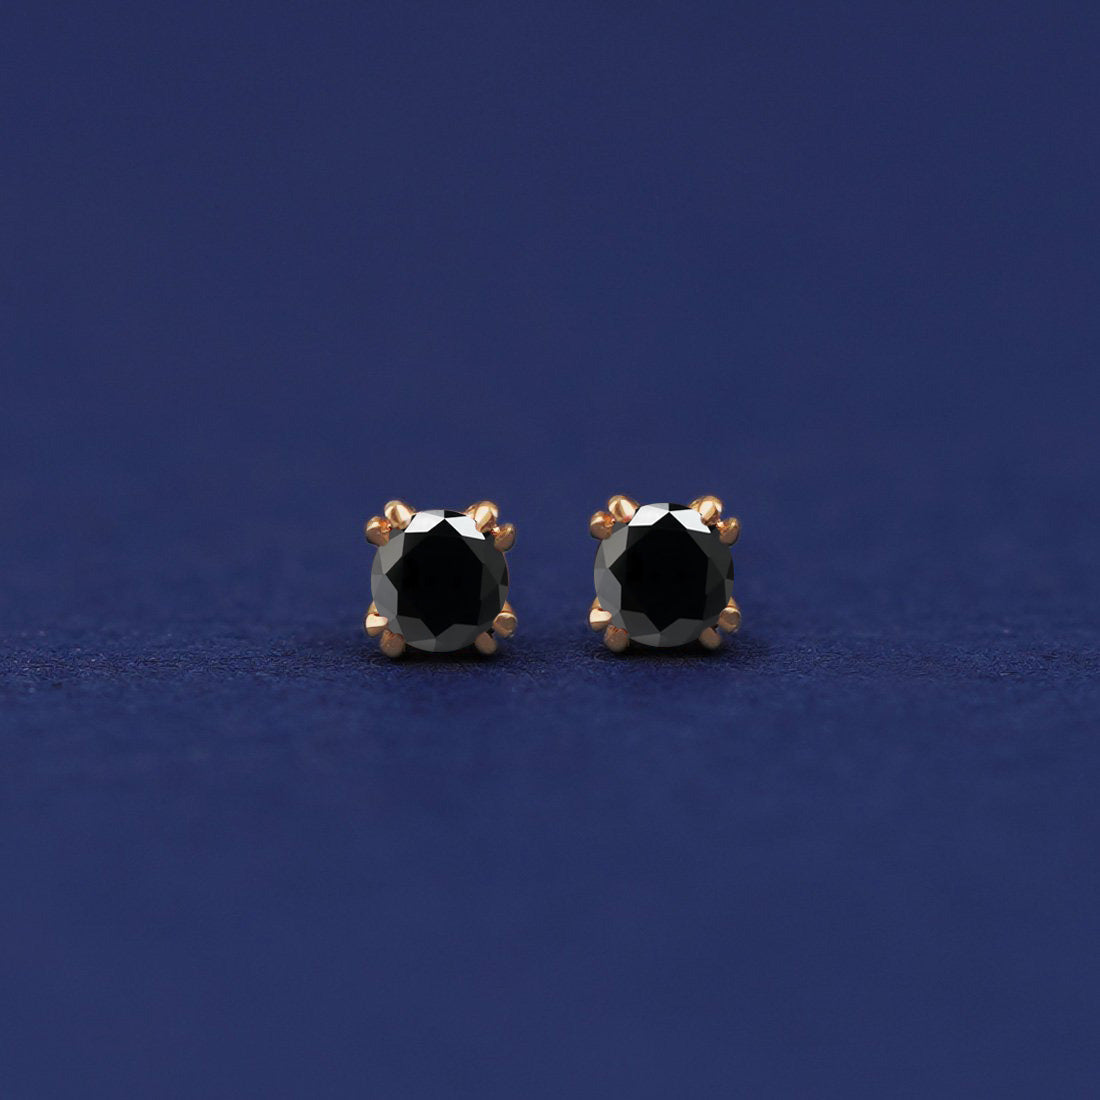 A pair of 14 karat gold studs earrings with 3 millimeter round 0.24ct Black Diamonds on a dark blue background